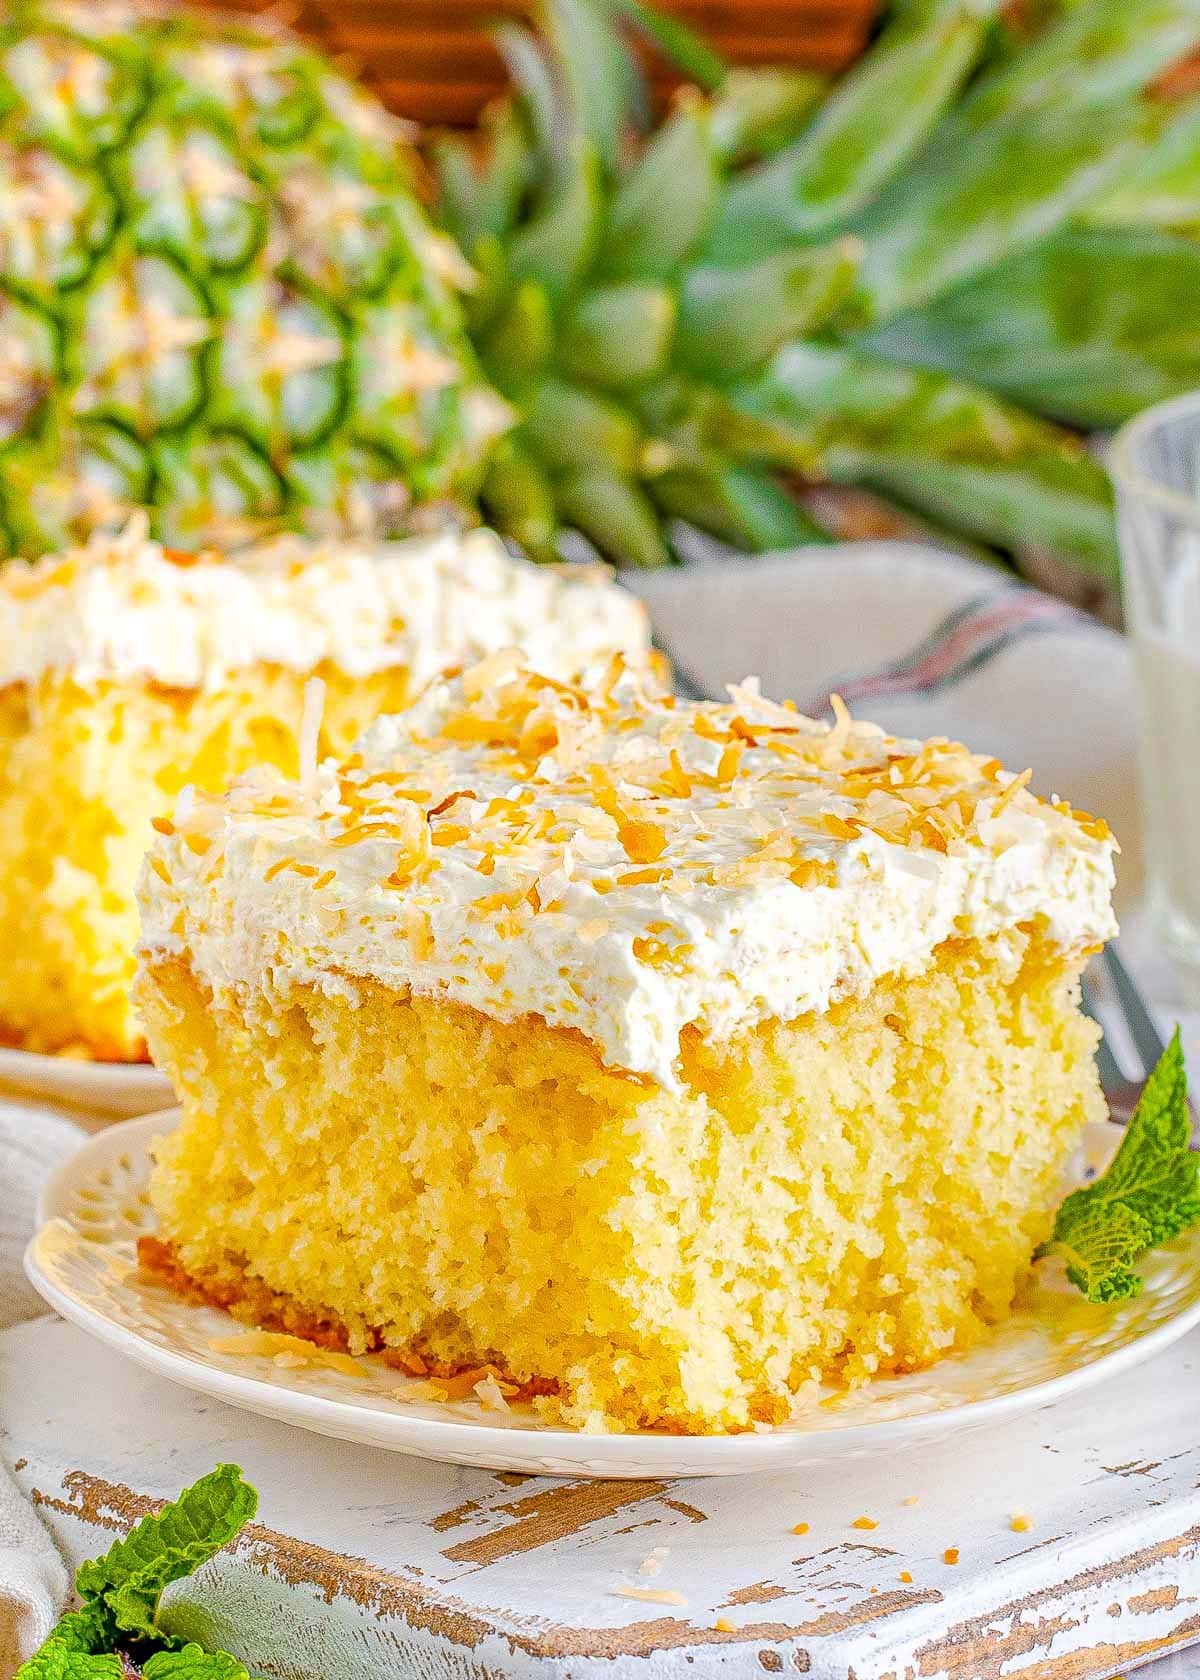 square piece of pina colada cake on a white plate frosted with white frosting and toasted coconut. a pineapple and another piece of cake can be seen in the background.